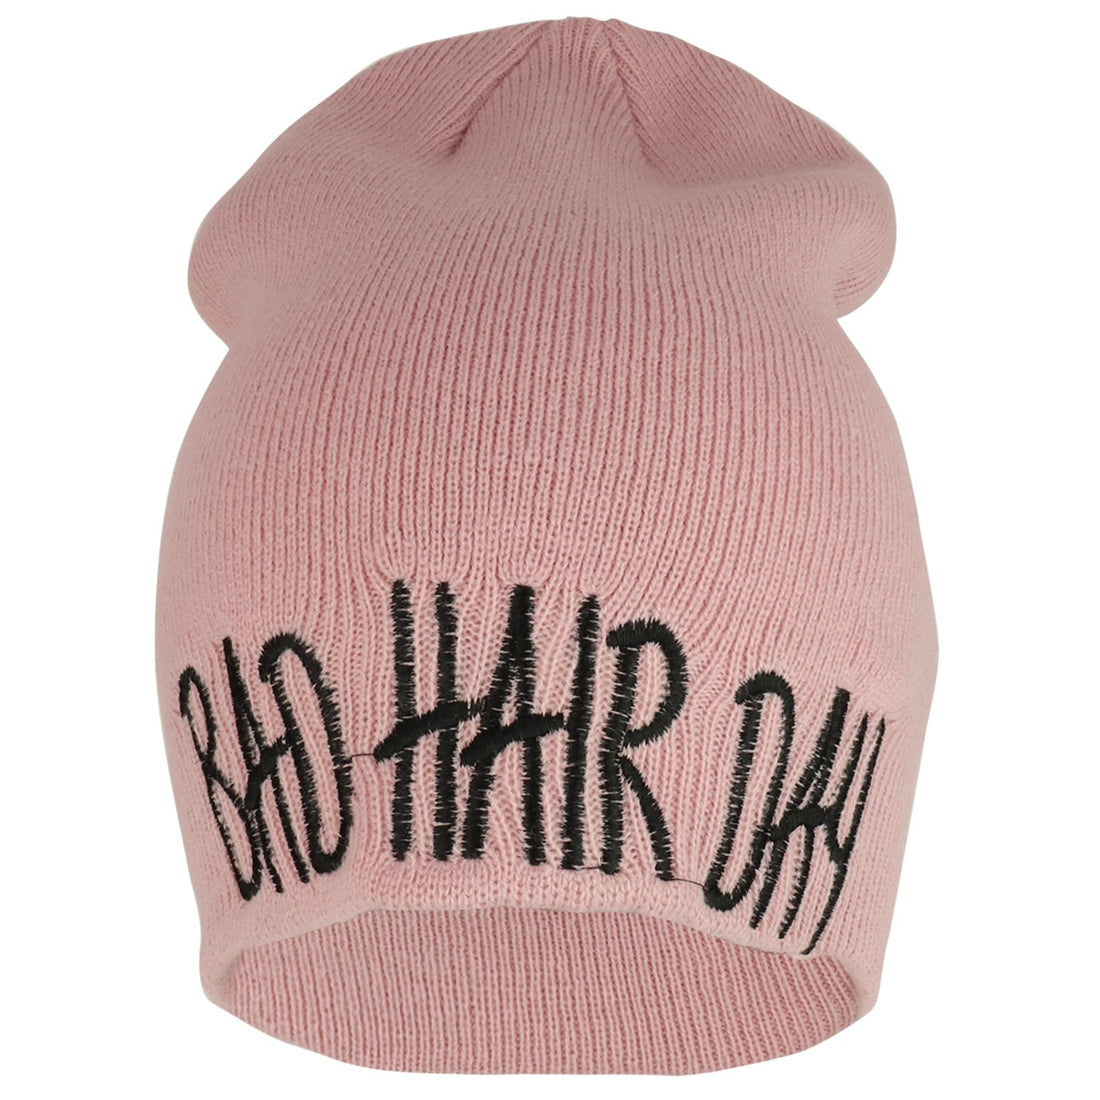 Trendy Apparel Shop Bad Hair Day Text Embroidered Beanie Hat